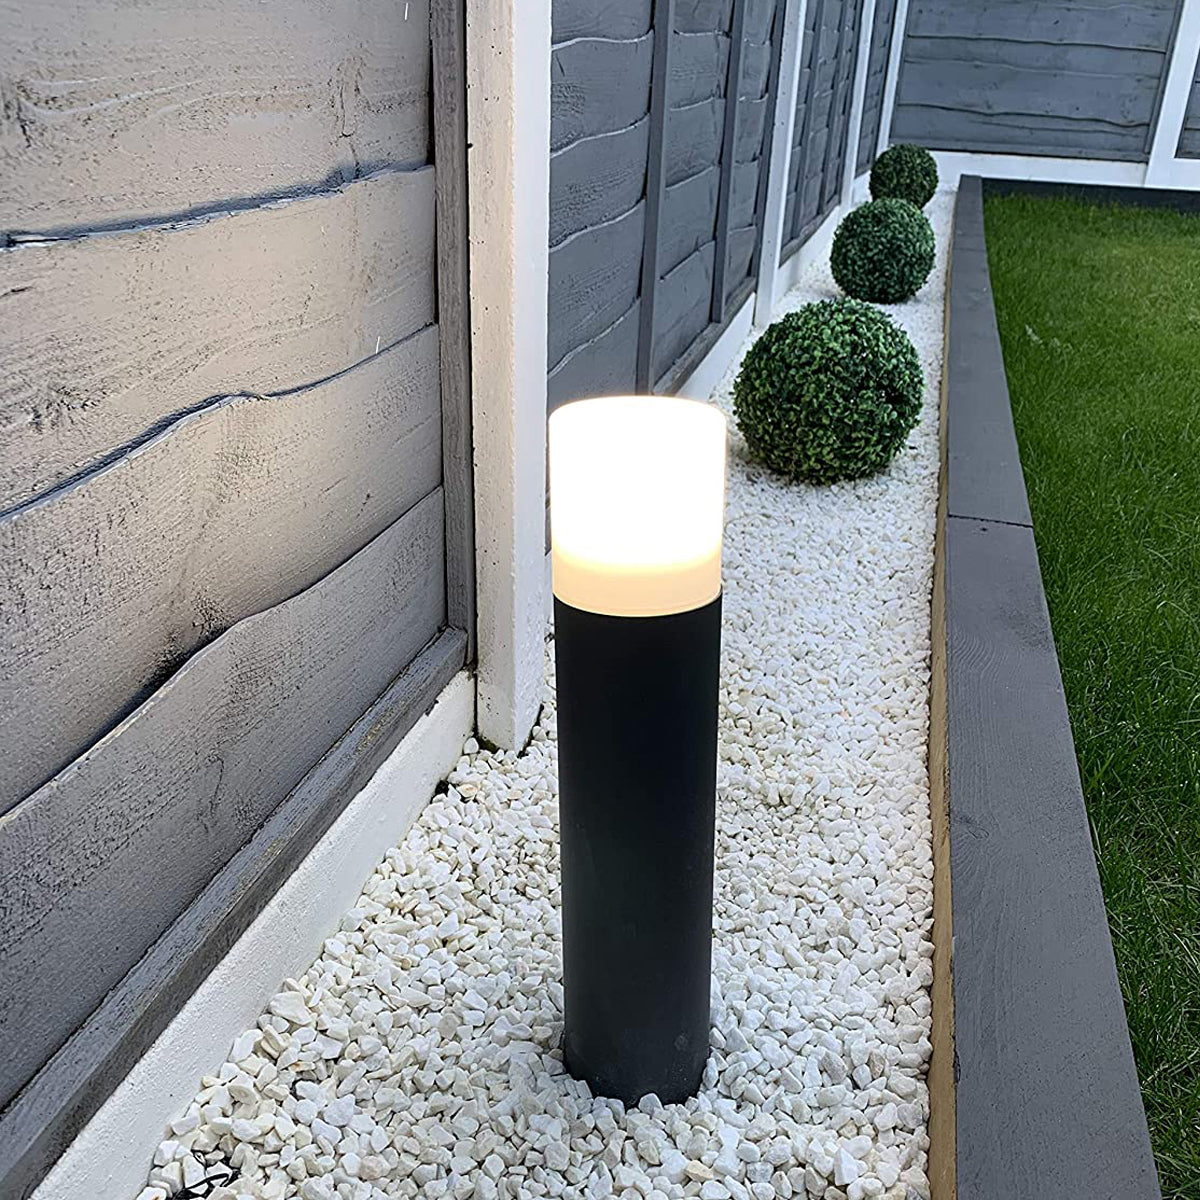 Our Cortez dark grey outdoor post light would look perfect in a modern or more traditional home design. Outside post lights can provide atmospheric light in your garden, at the front door or on the terrace as well as a great security solution. It is designed for durability and longevity with its robust material producing a fully weatherproof and water resistant light fitting.